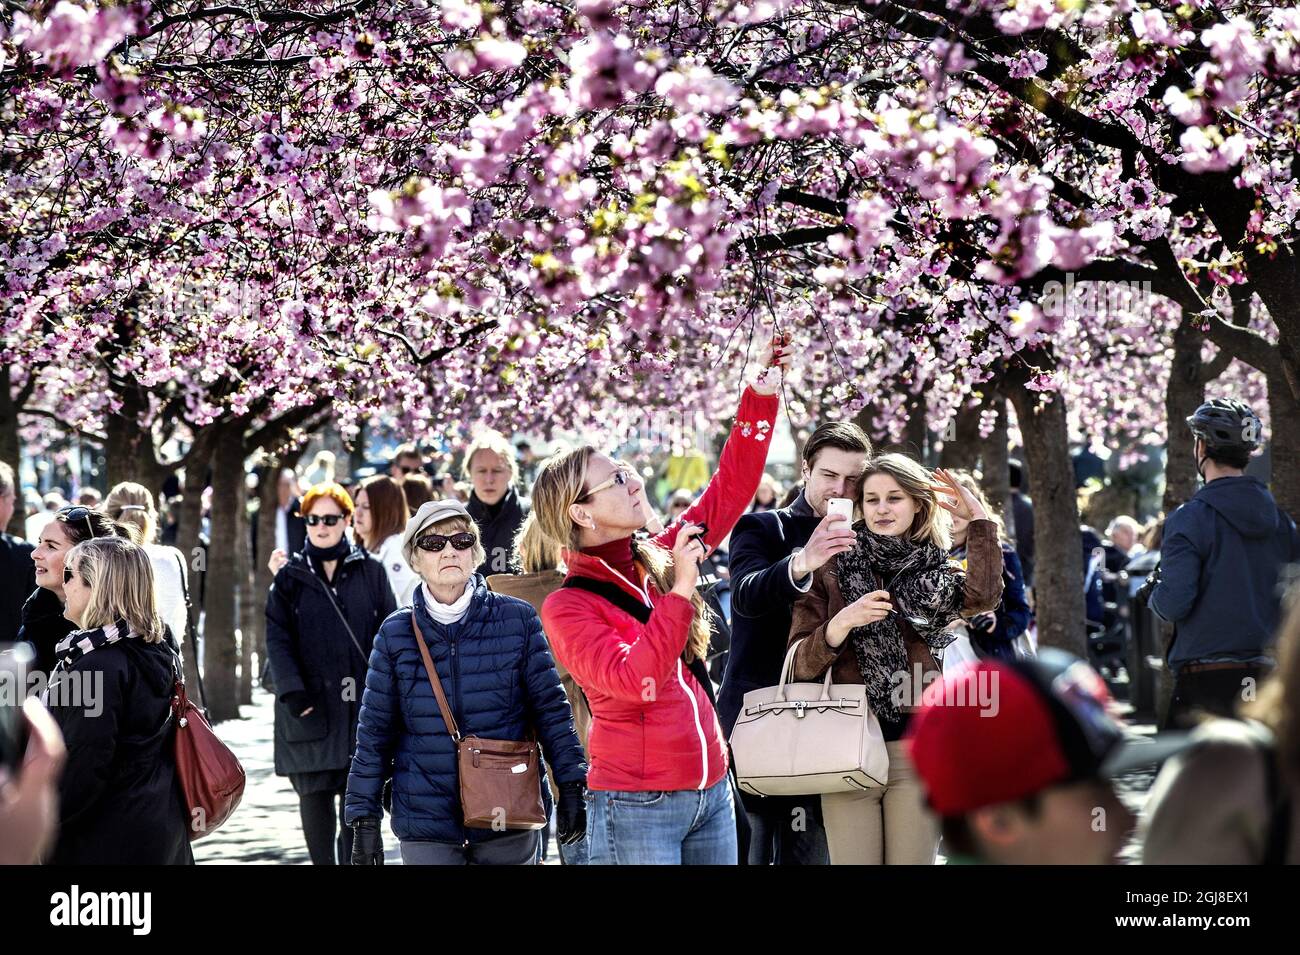 STOCKHOLM 2014-04-14 People take selfies among the pink cherry blossom at  Kungstradgarden (the Royal Garden) in Stockholm, Sweden. Foto: Tomas  Oneborg / SvD / TT / Kod 30142 Stock Photo - Alamy